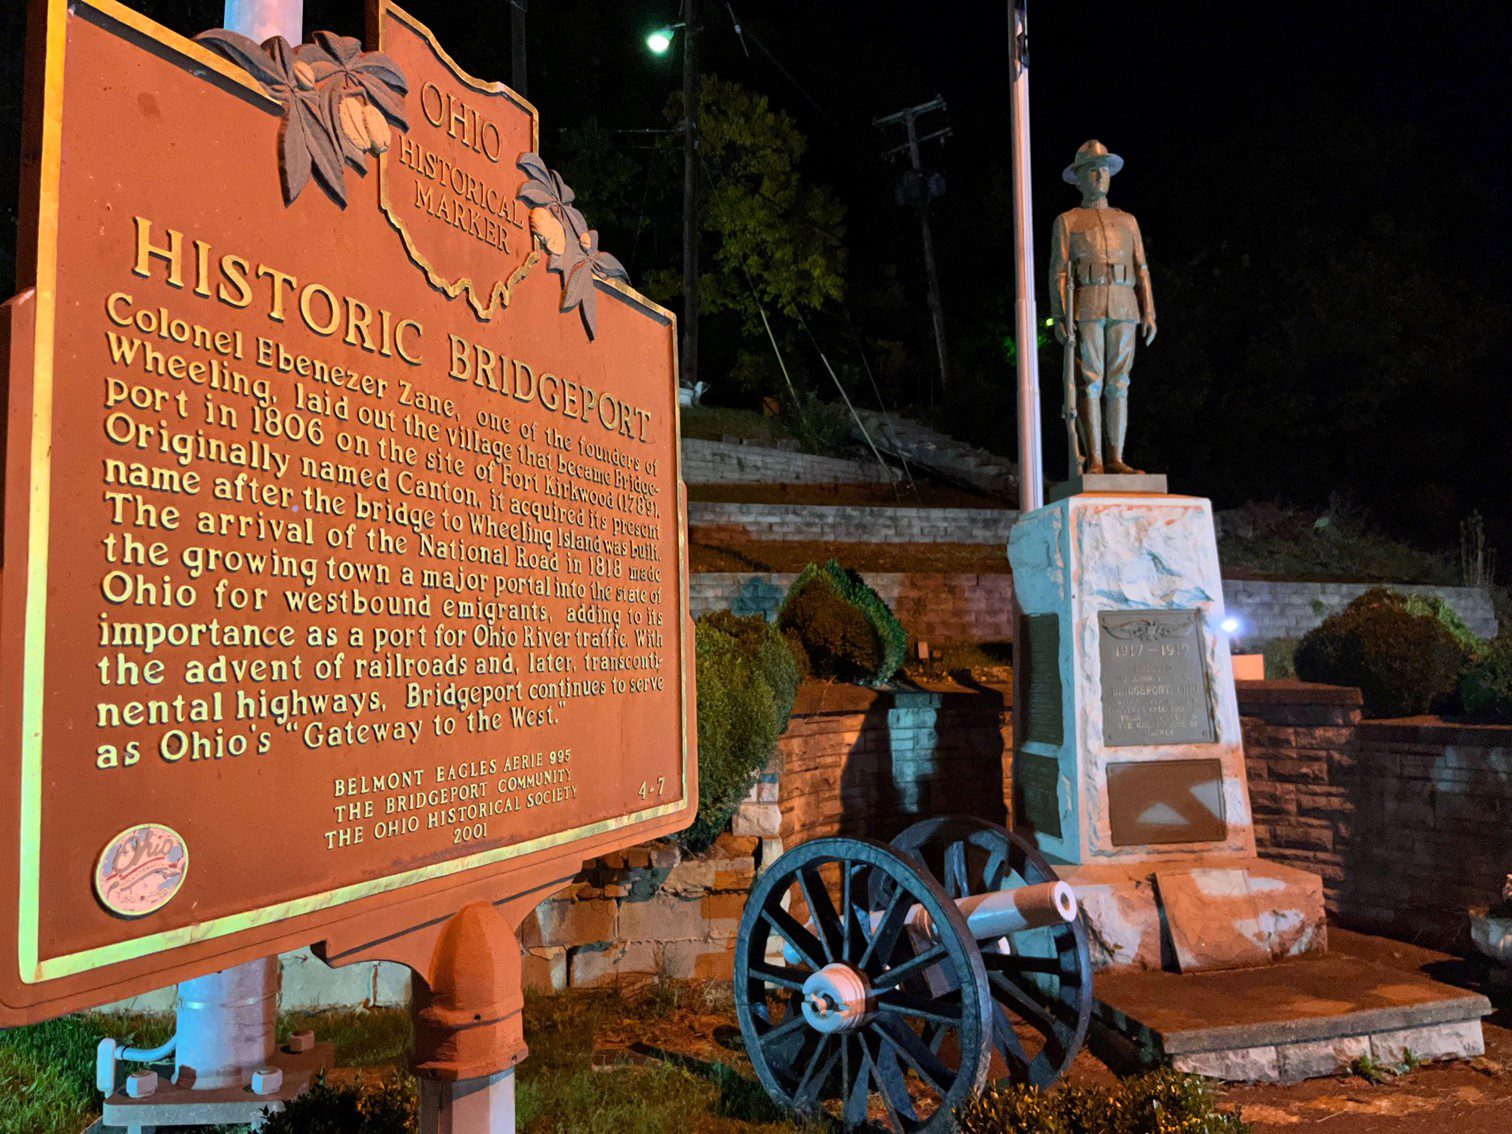 An outdoor image at night with a close-up of a Ohio Historical Marker for Historic Bridgeport. It explains the significance of the area and a statue of a WWI solder.